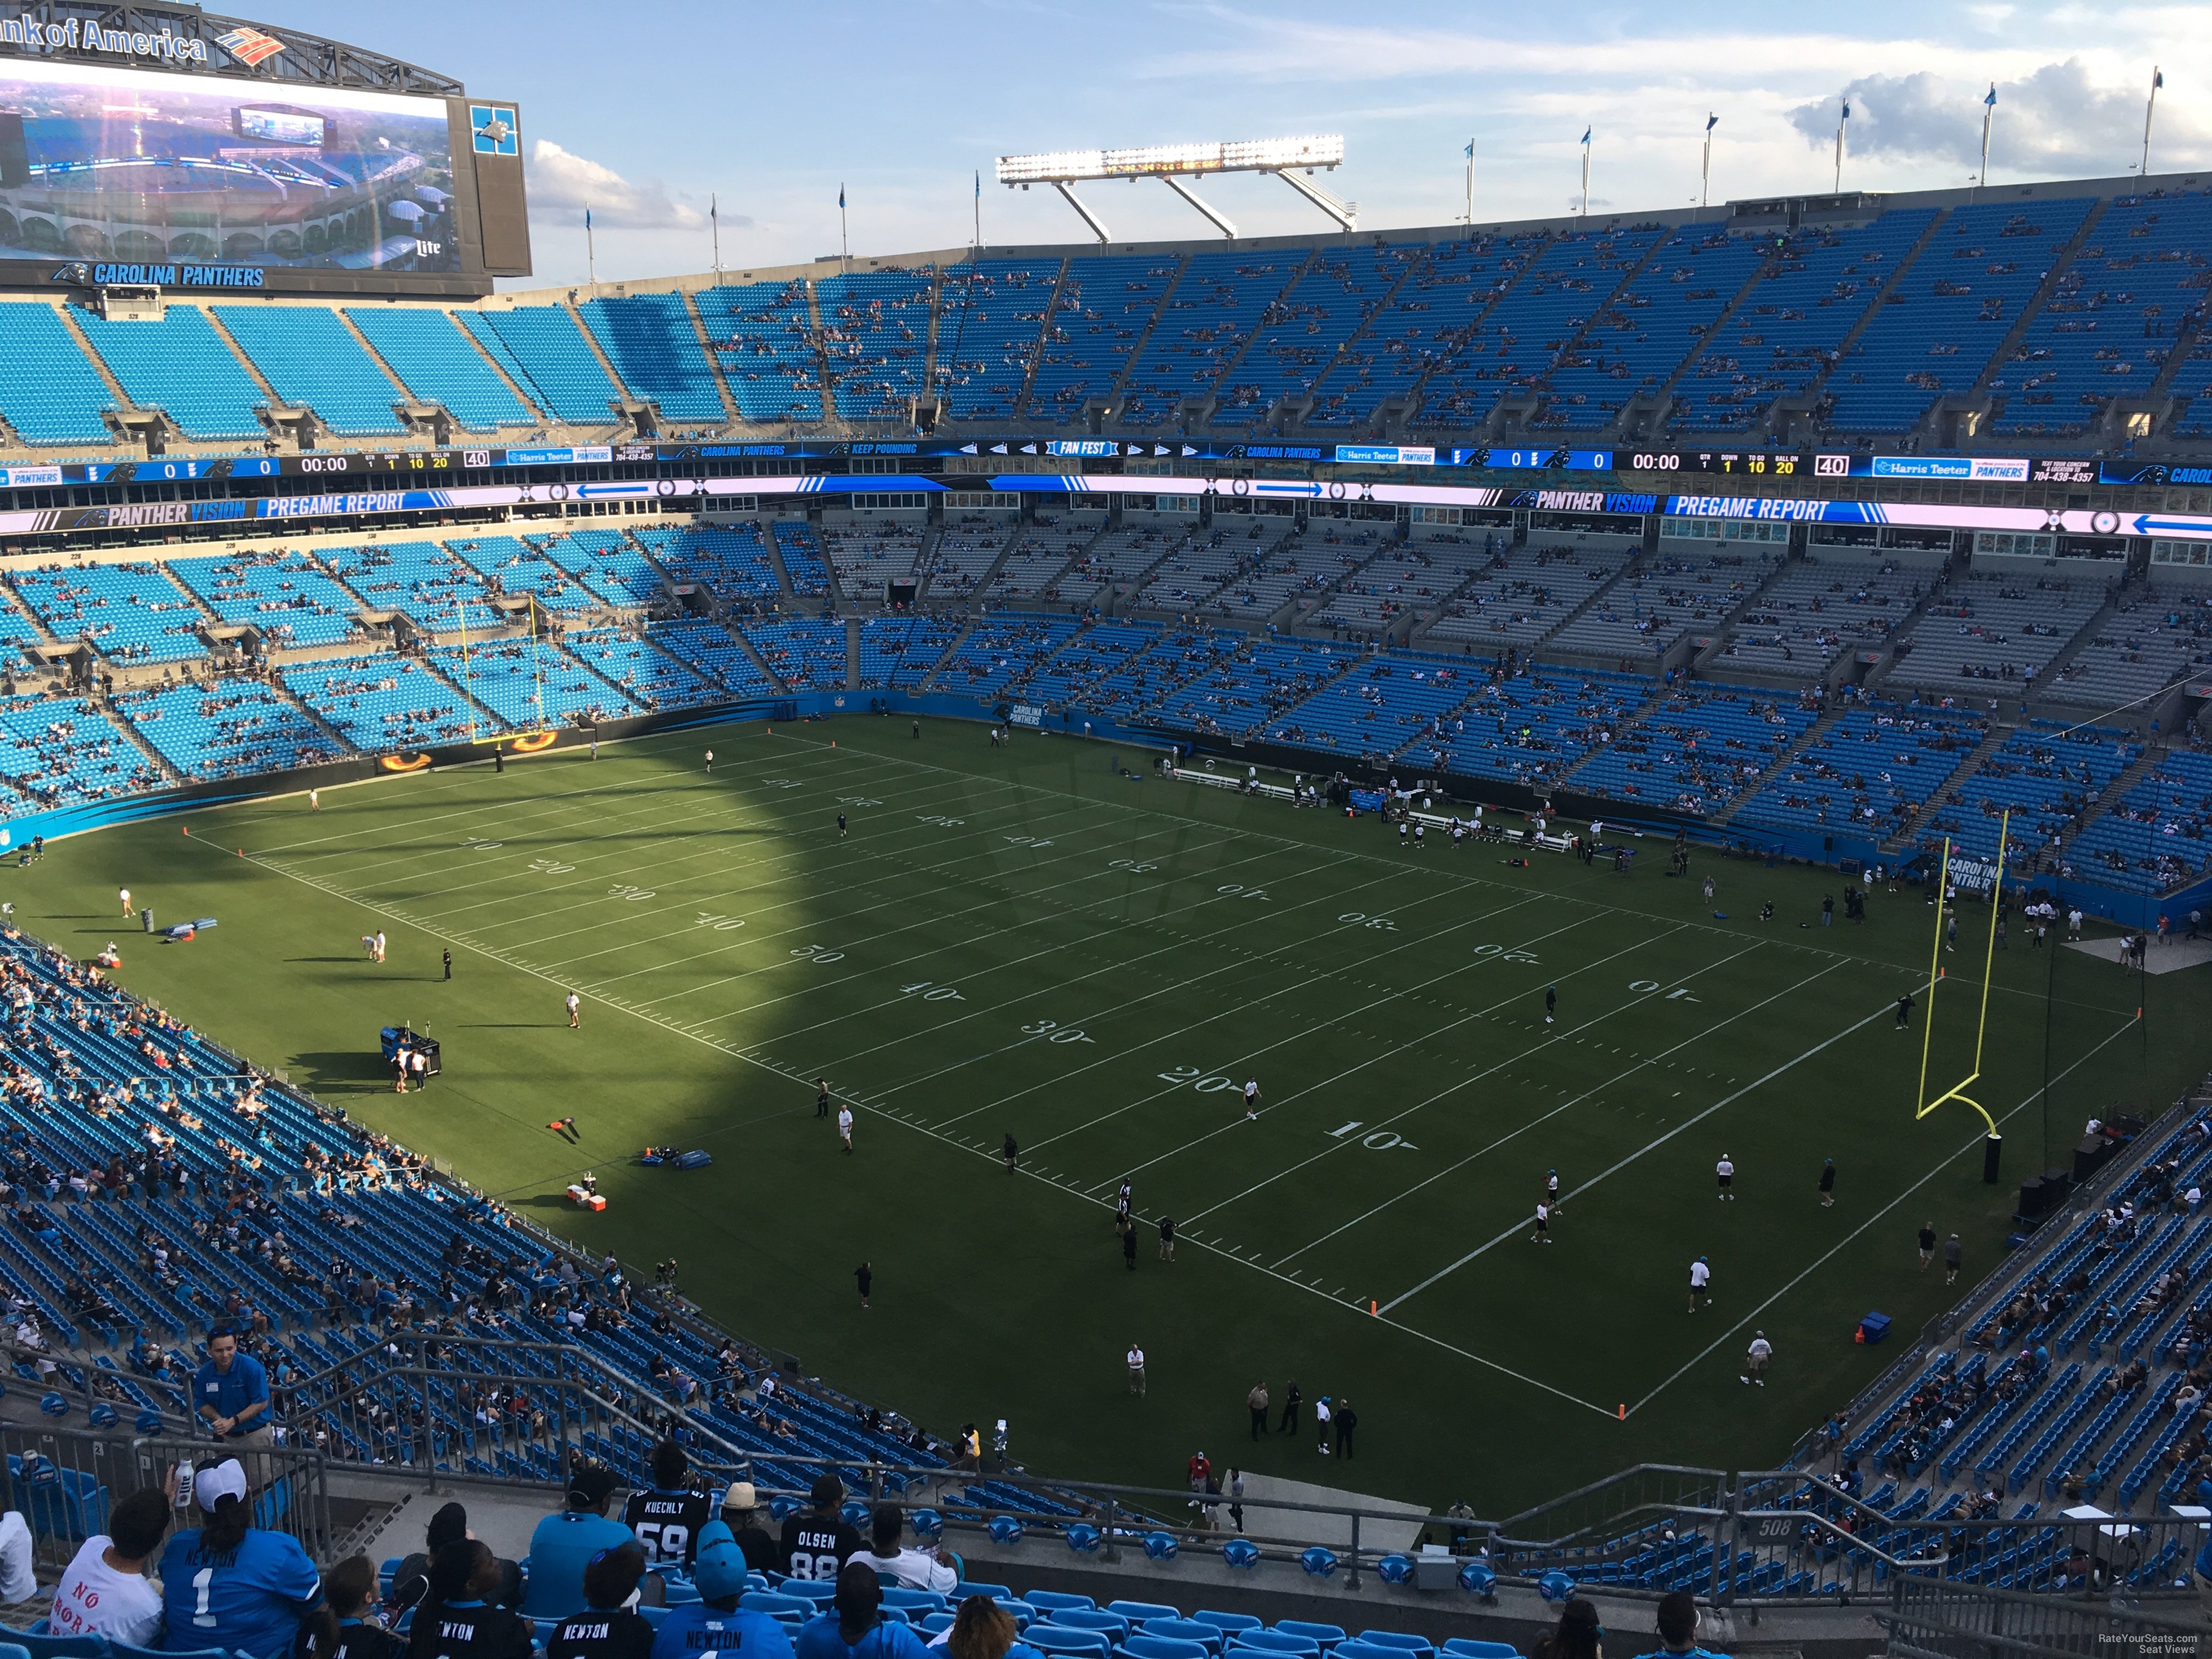 section 508, row 9 seat view  for football - bank of america stadium